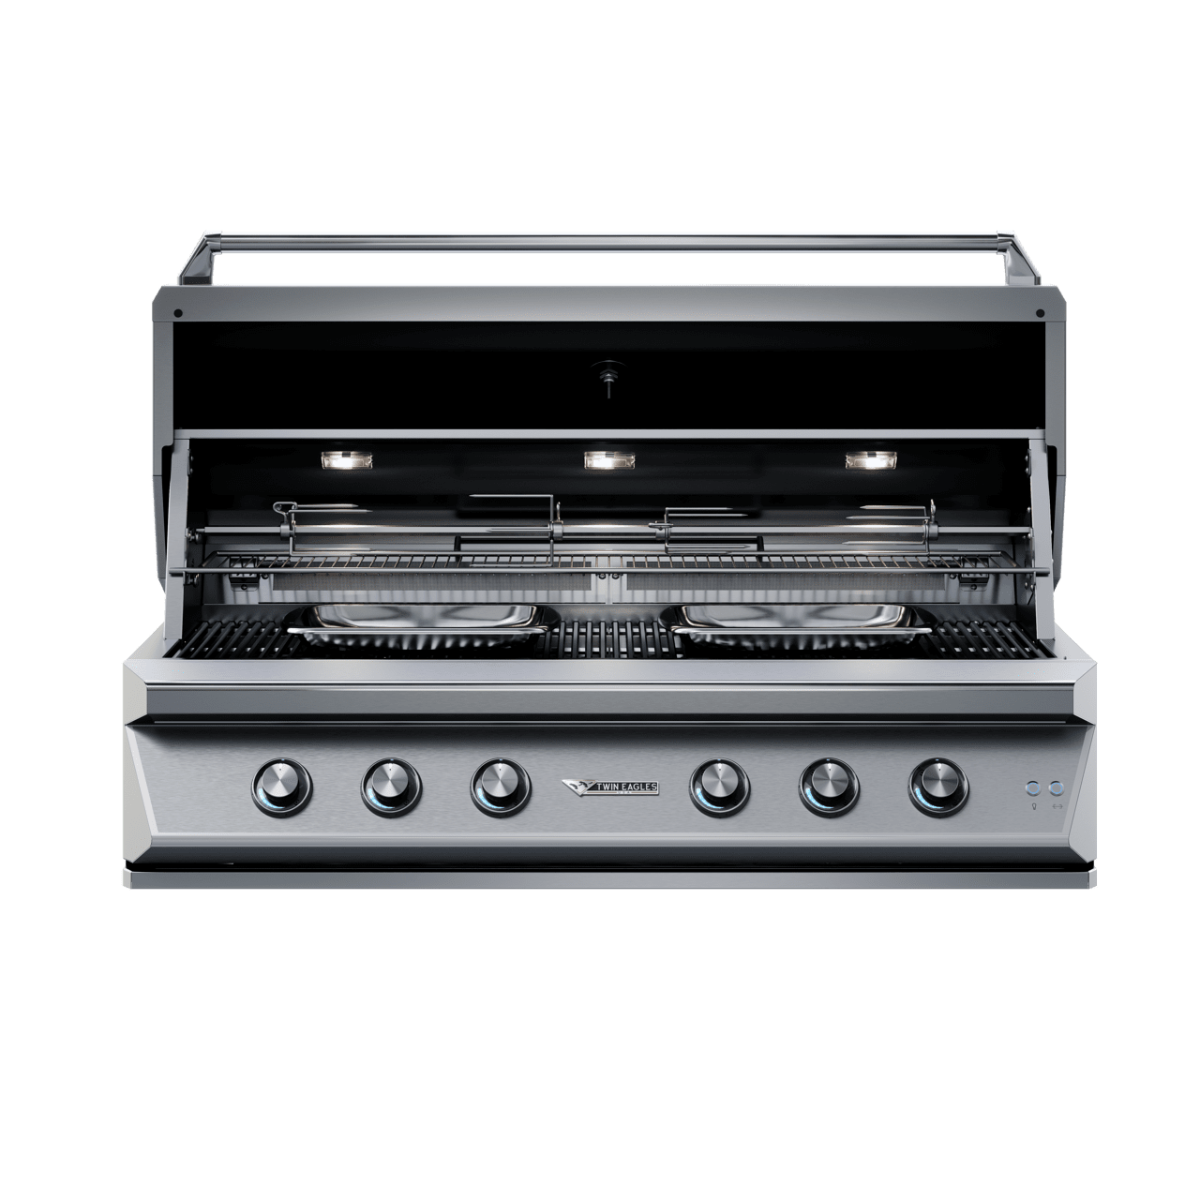 Front view of a 54-inch Twin Eagles gas grill with the lid open, revealing the grilling area and internal lights. The stainless steel grill includes five control knobs at the front and features an infrared rotisserie and sear zone.